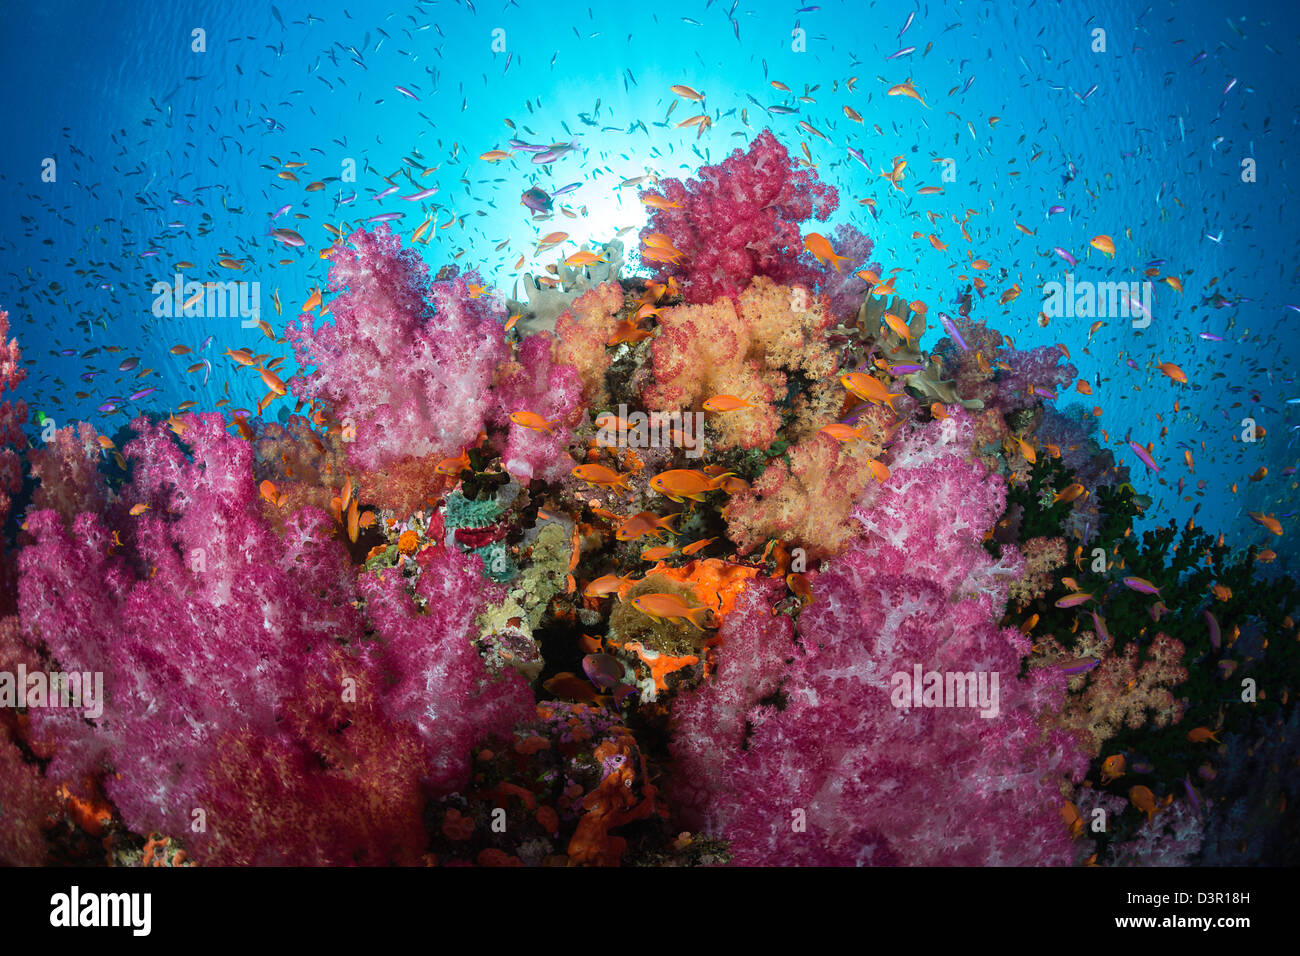 Alconarian coral and schooling anthias dominate this Fijian reef scene. Stock Photo